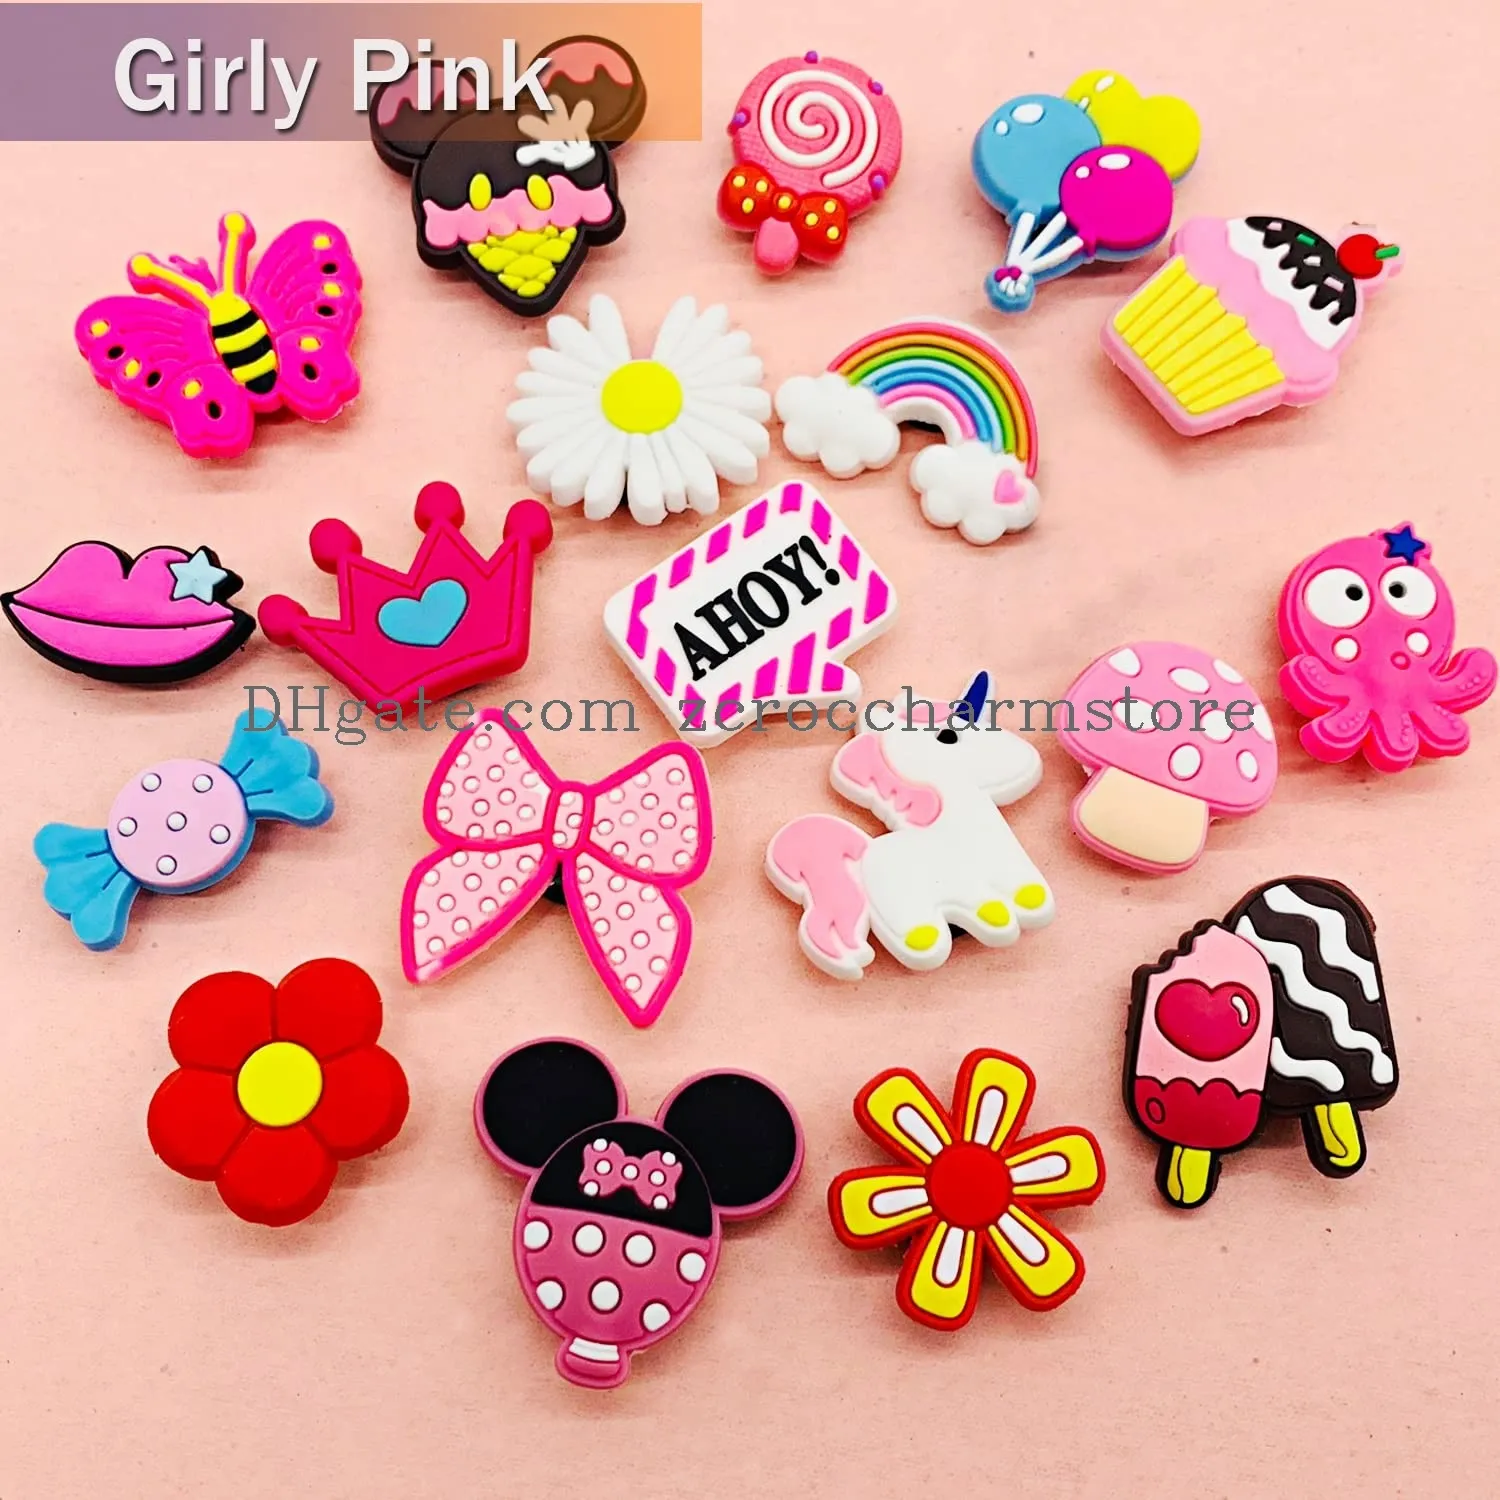 different cute pvc shoe charms for clog sandals bracelet shoes decorations charms for party favors birthday gifts